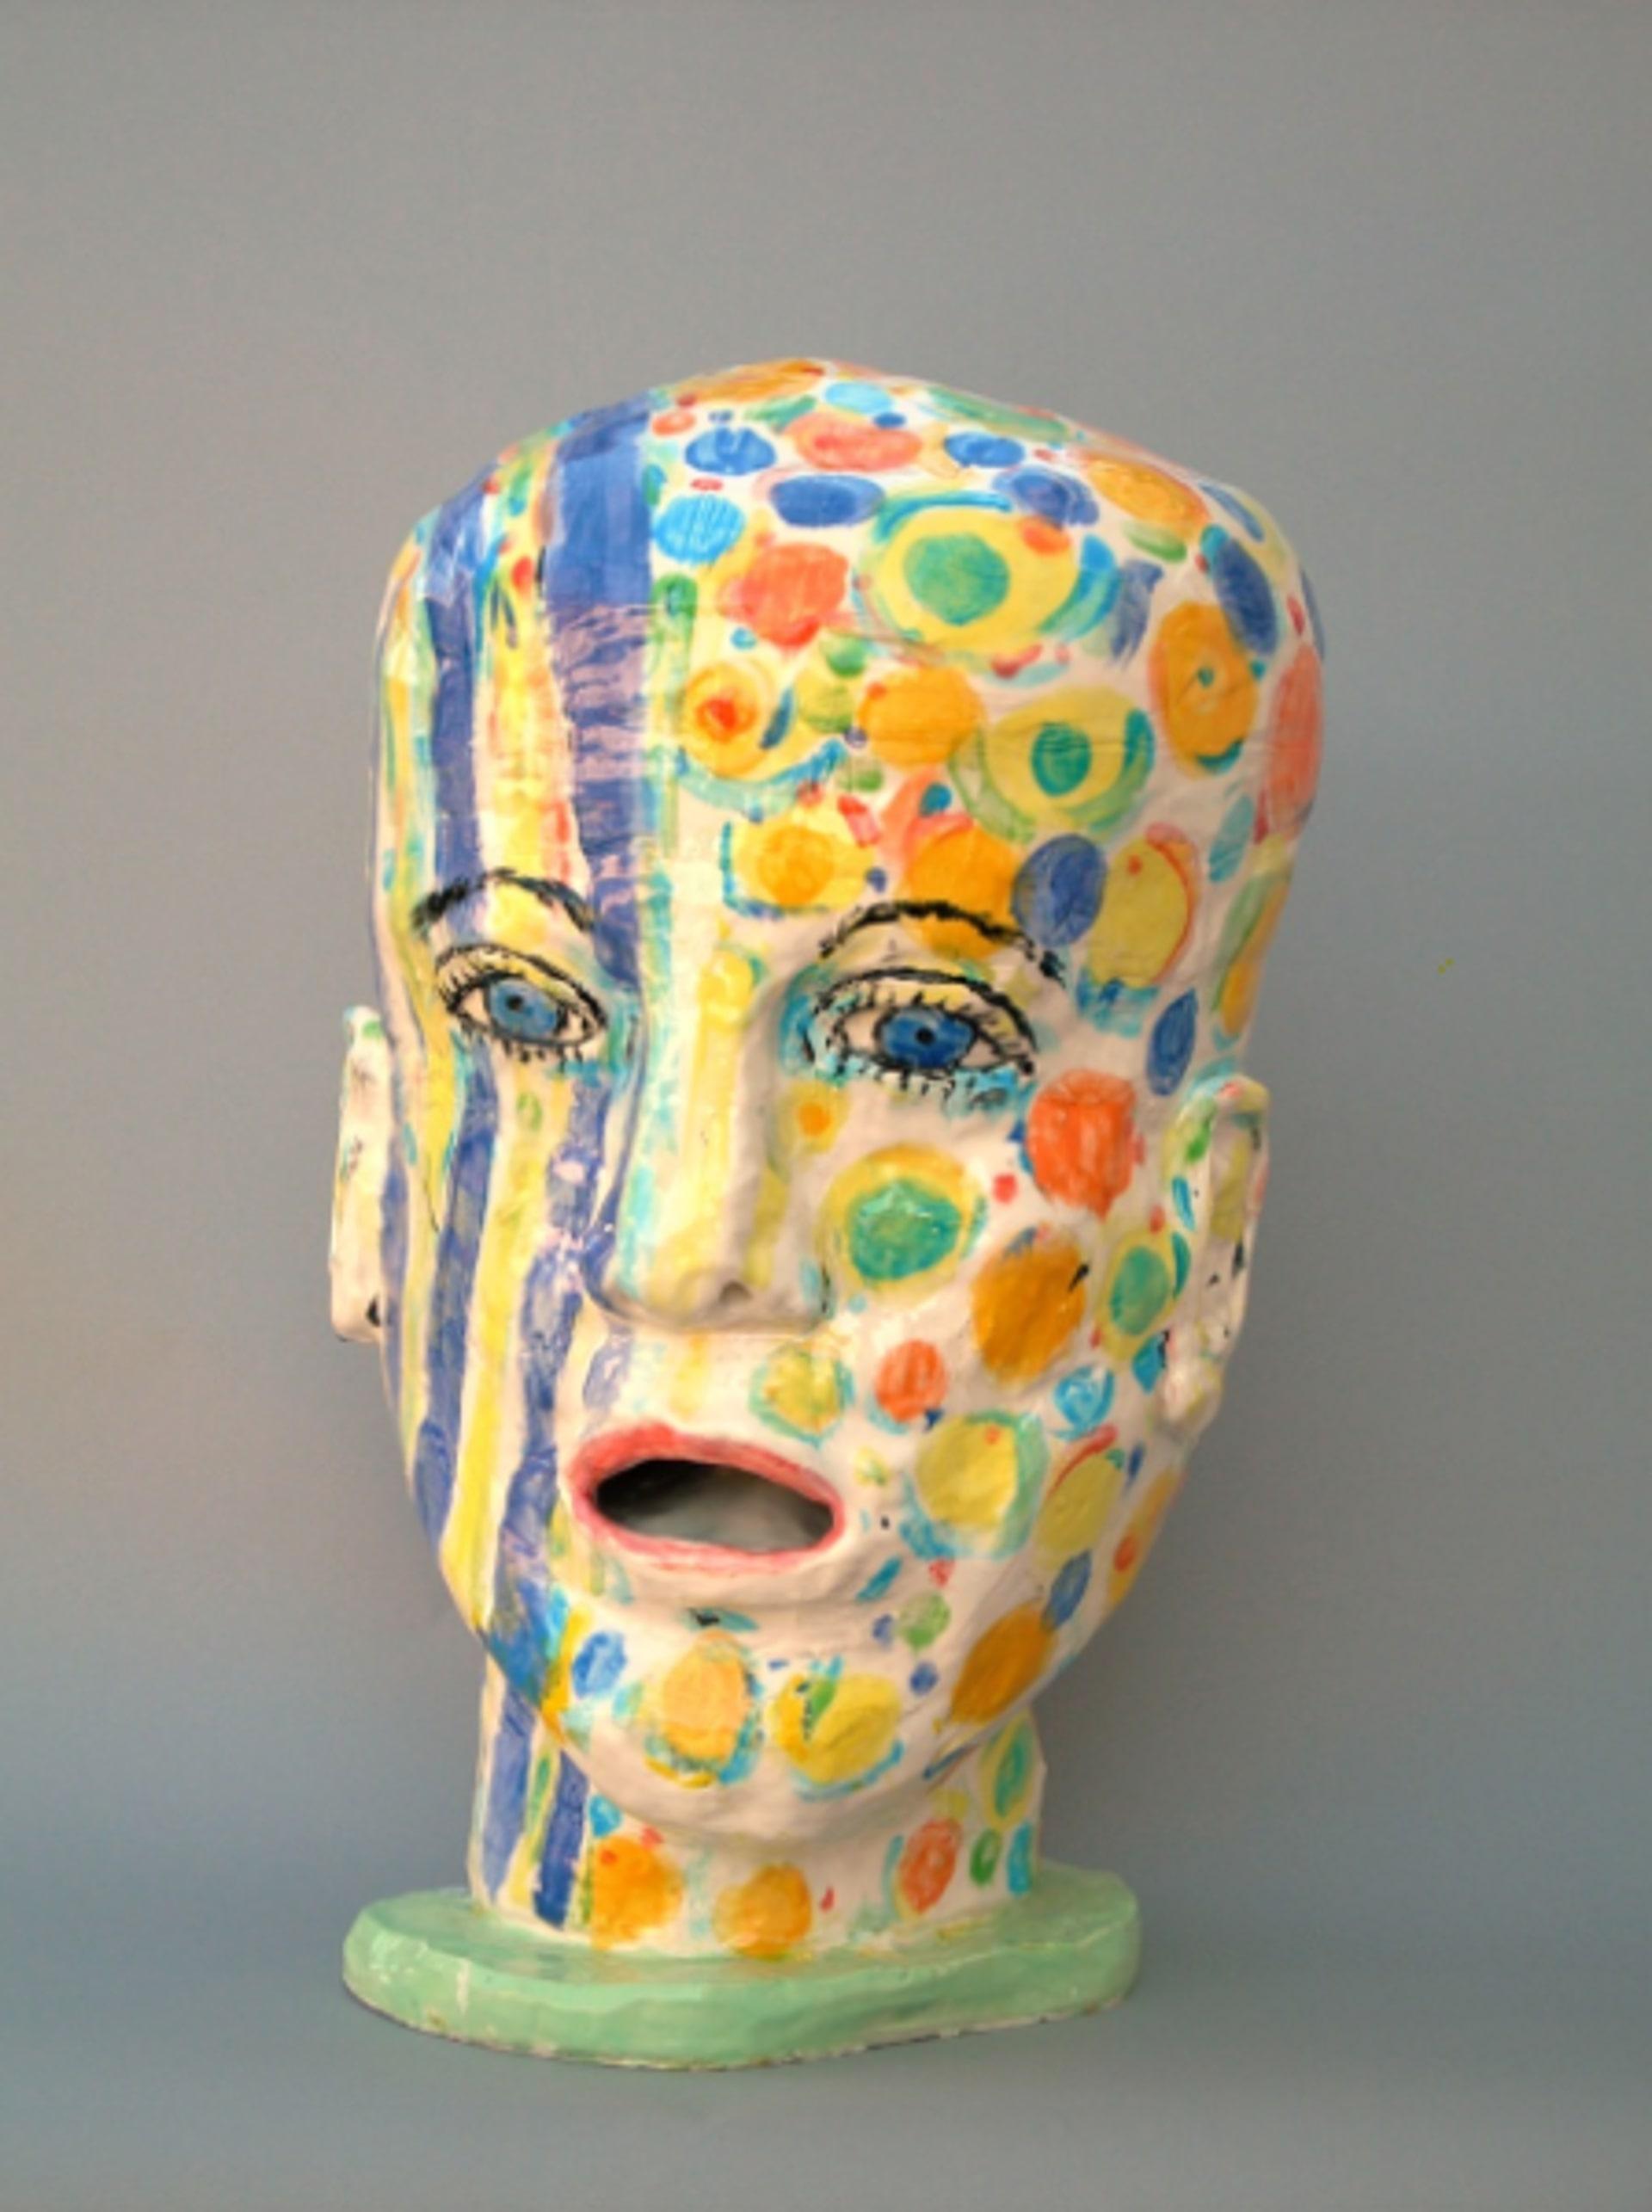 "Patterned Head 3", 2007 - Art by Linda Smith